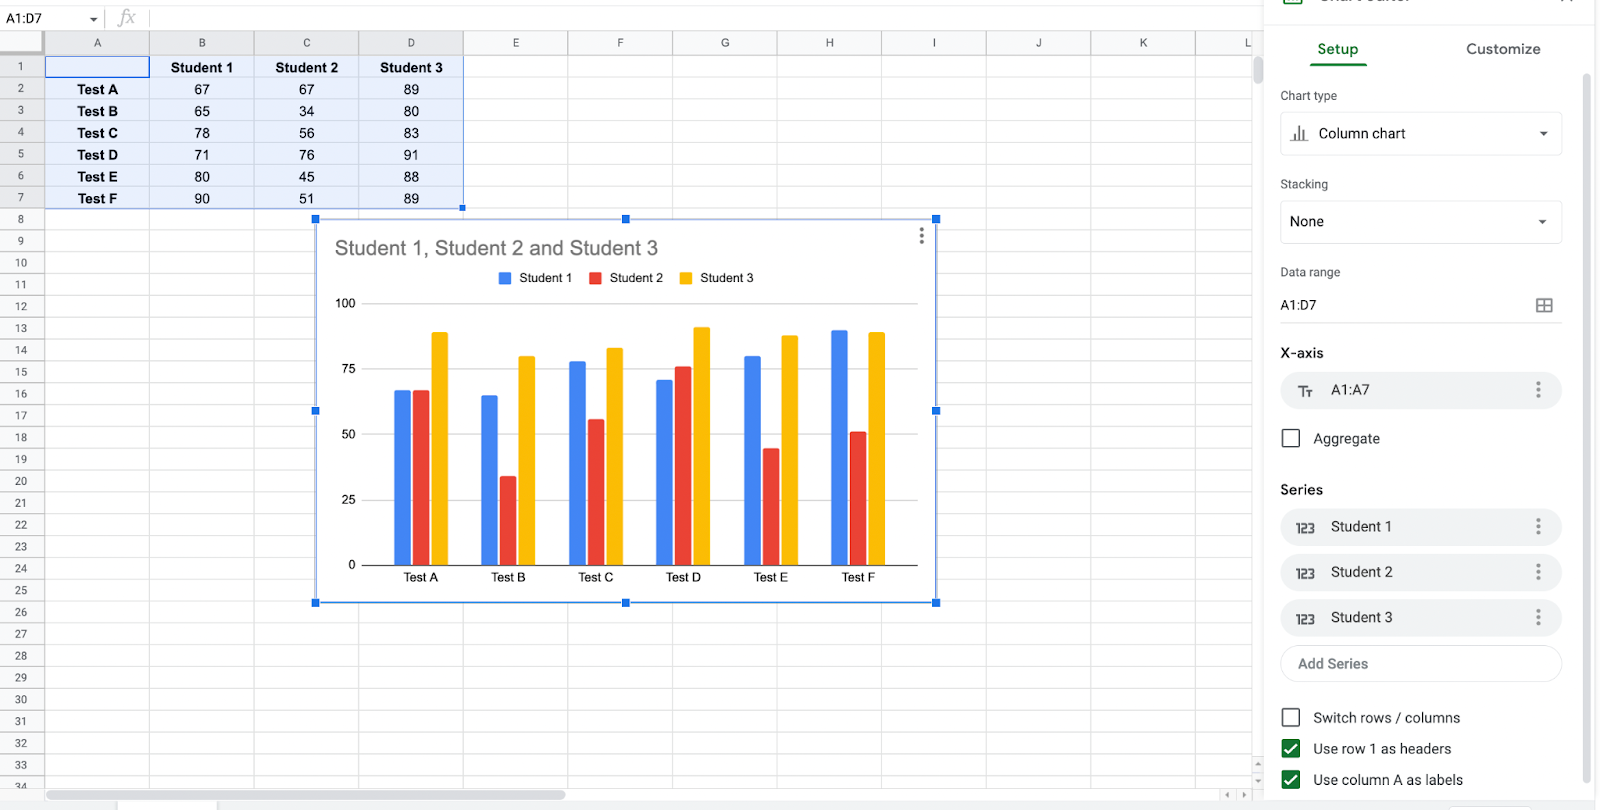 Trend Line: How To Add In Google Sheets?